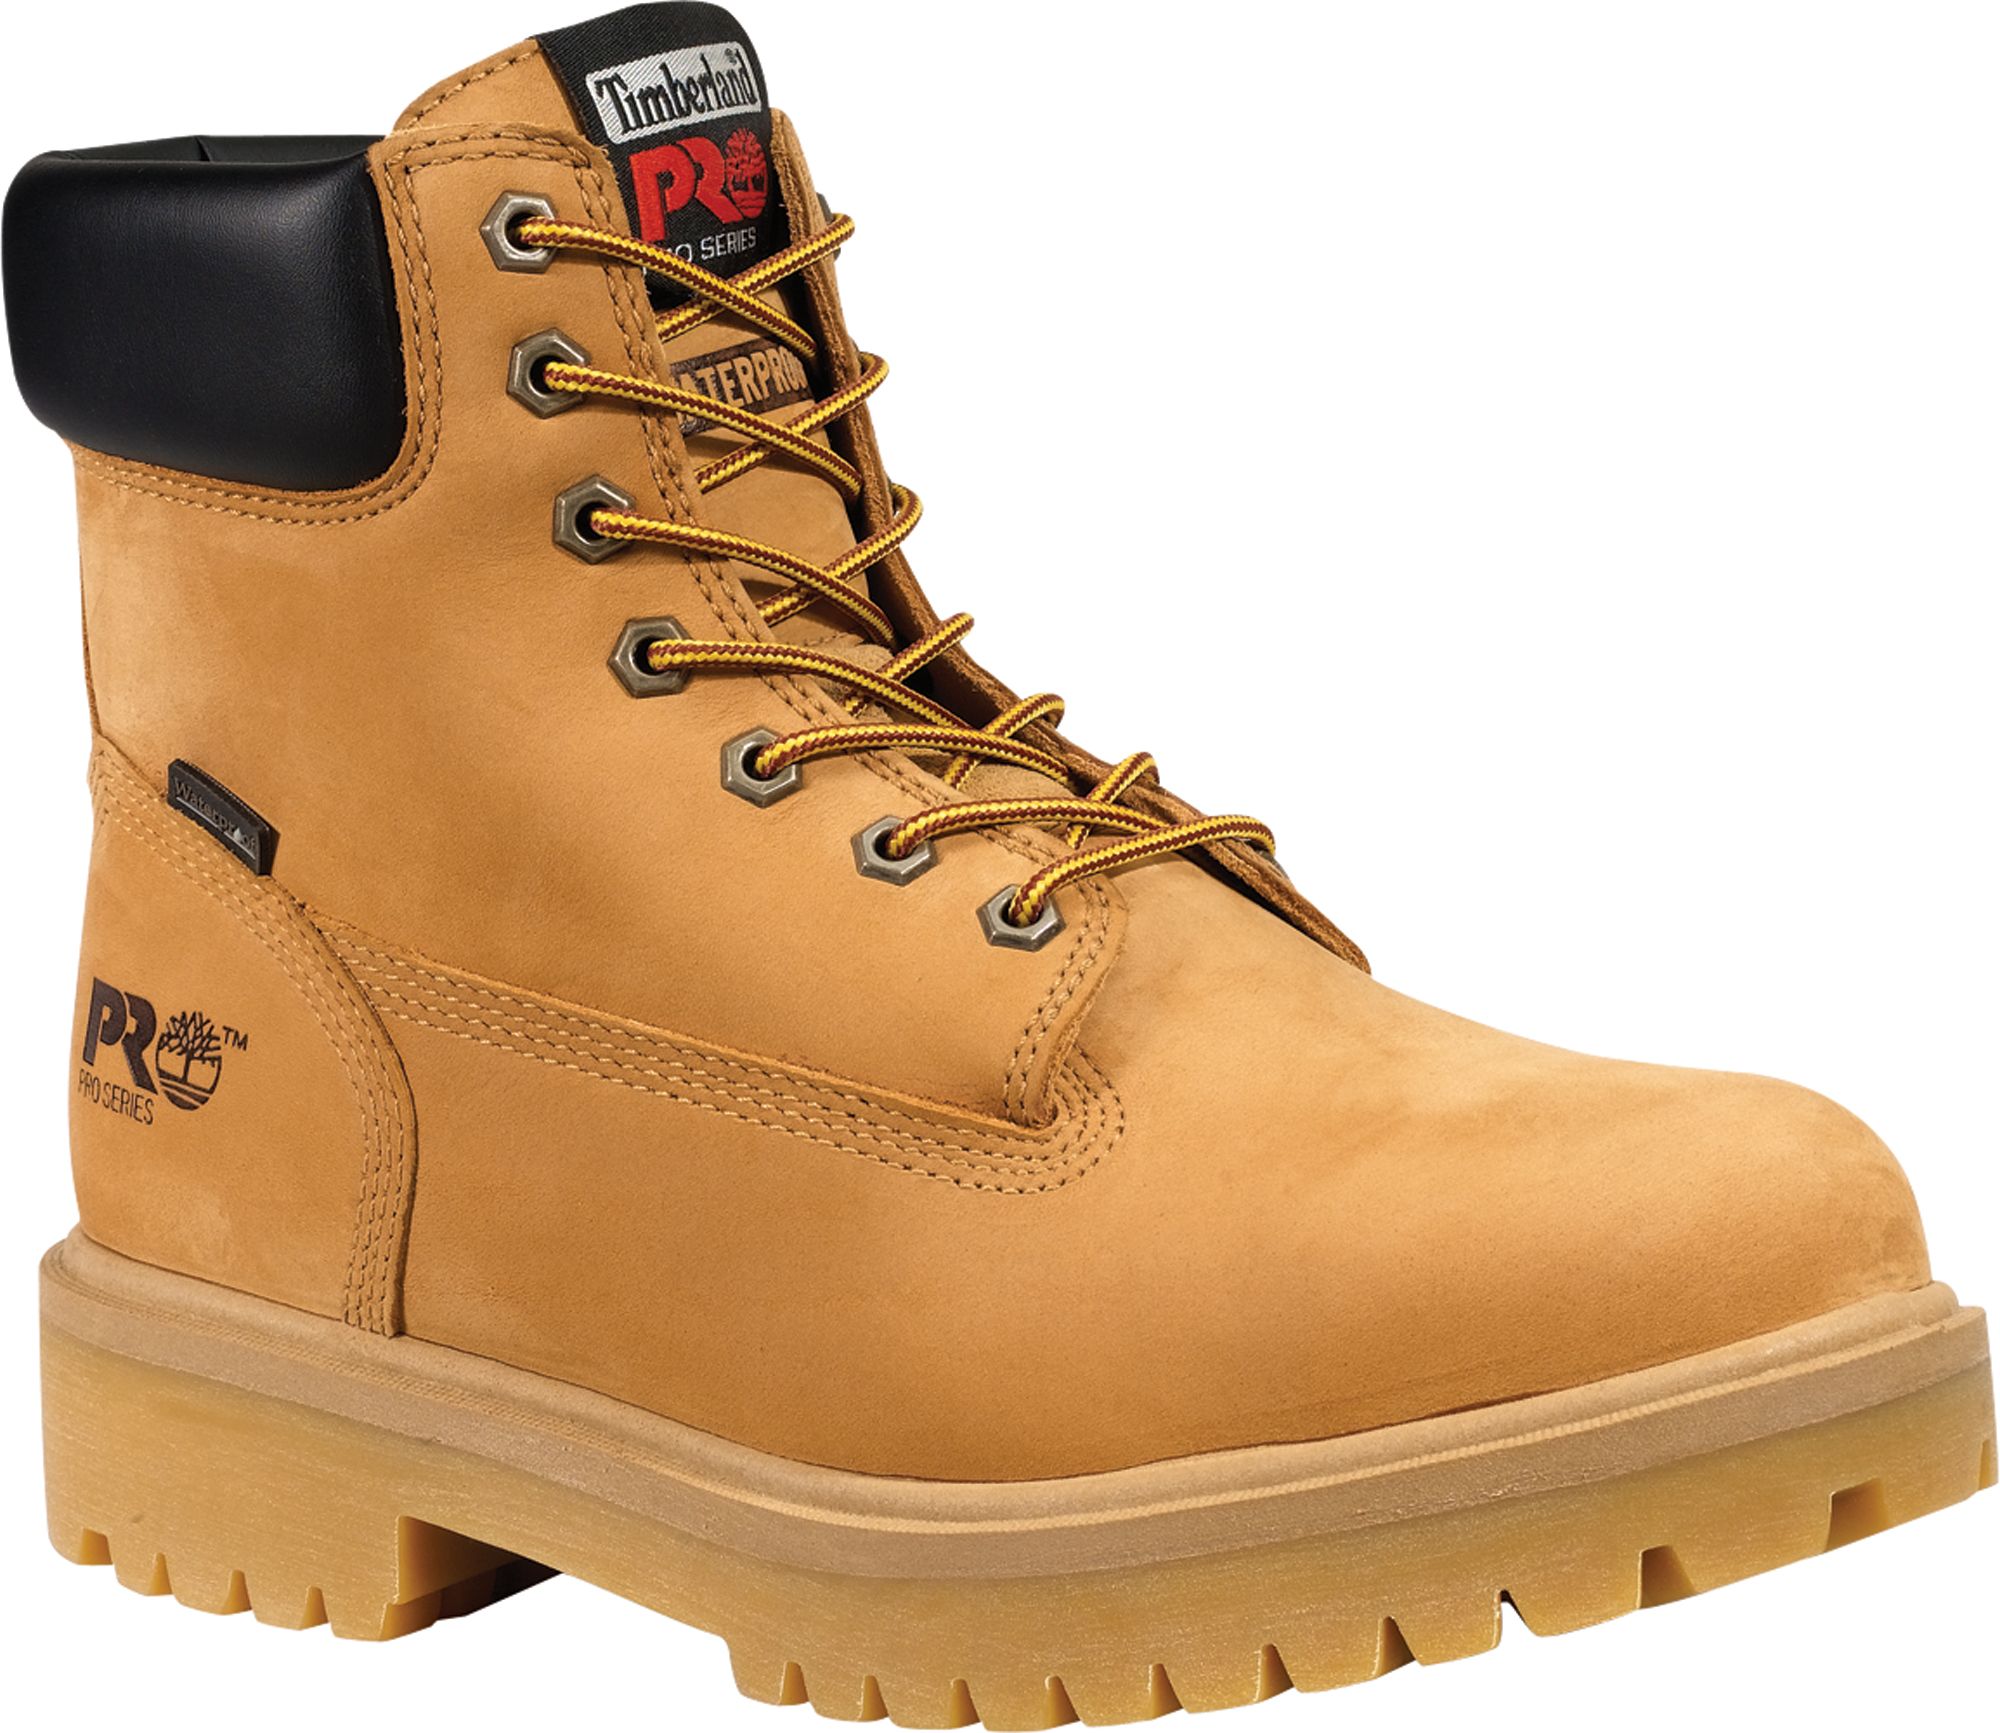 timb work boots